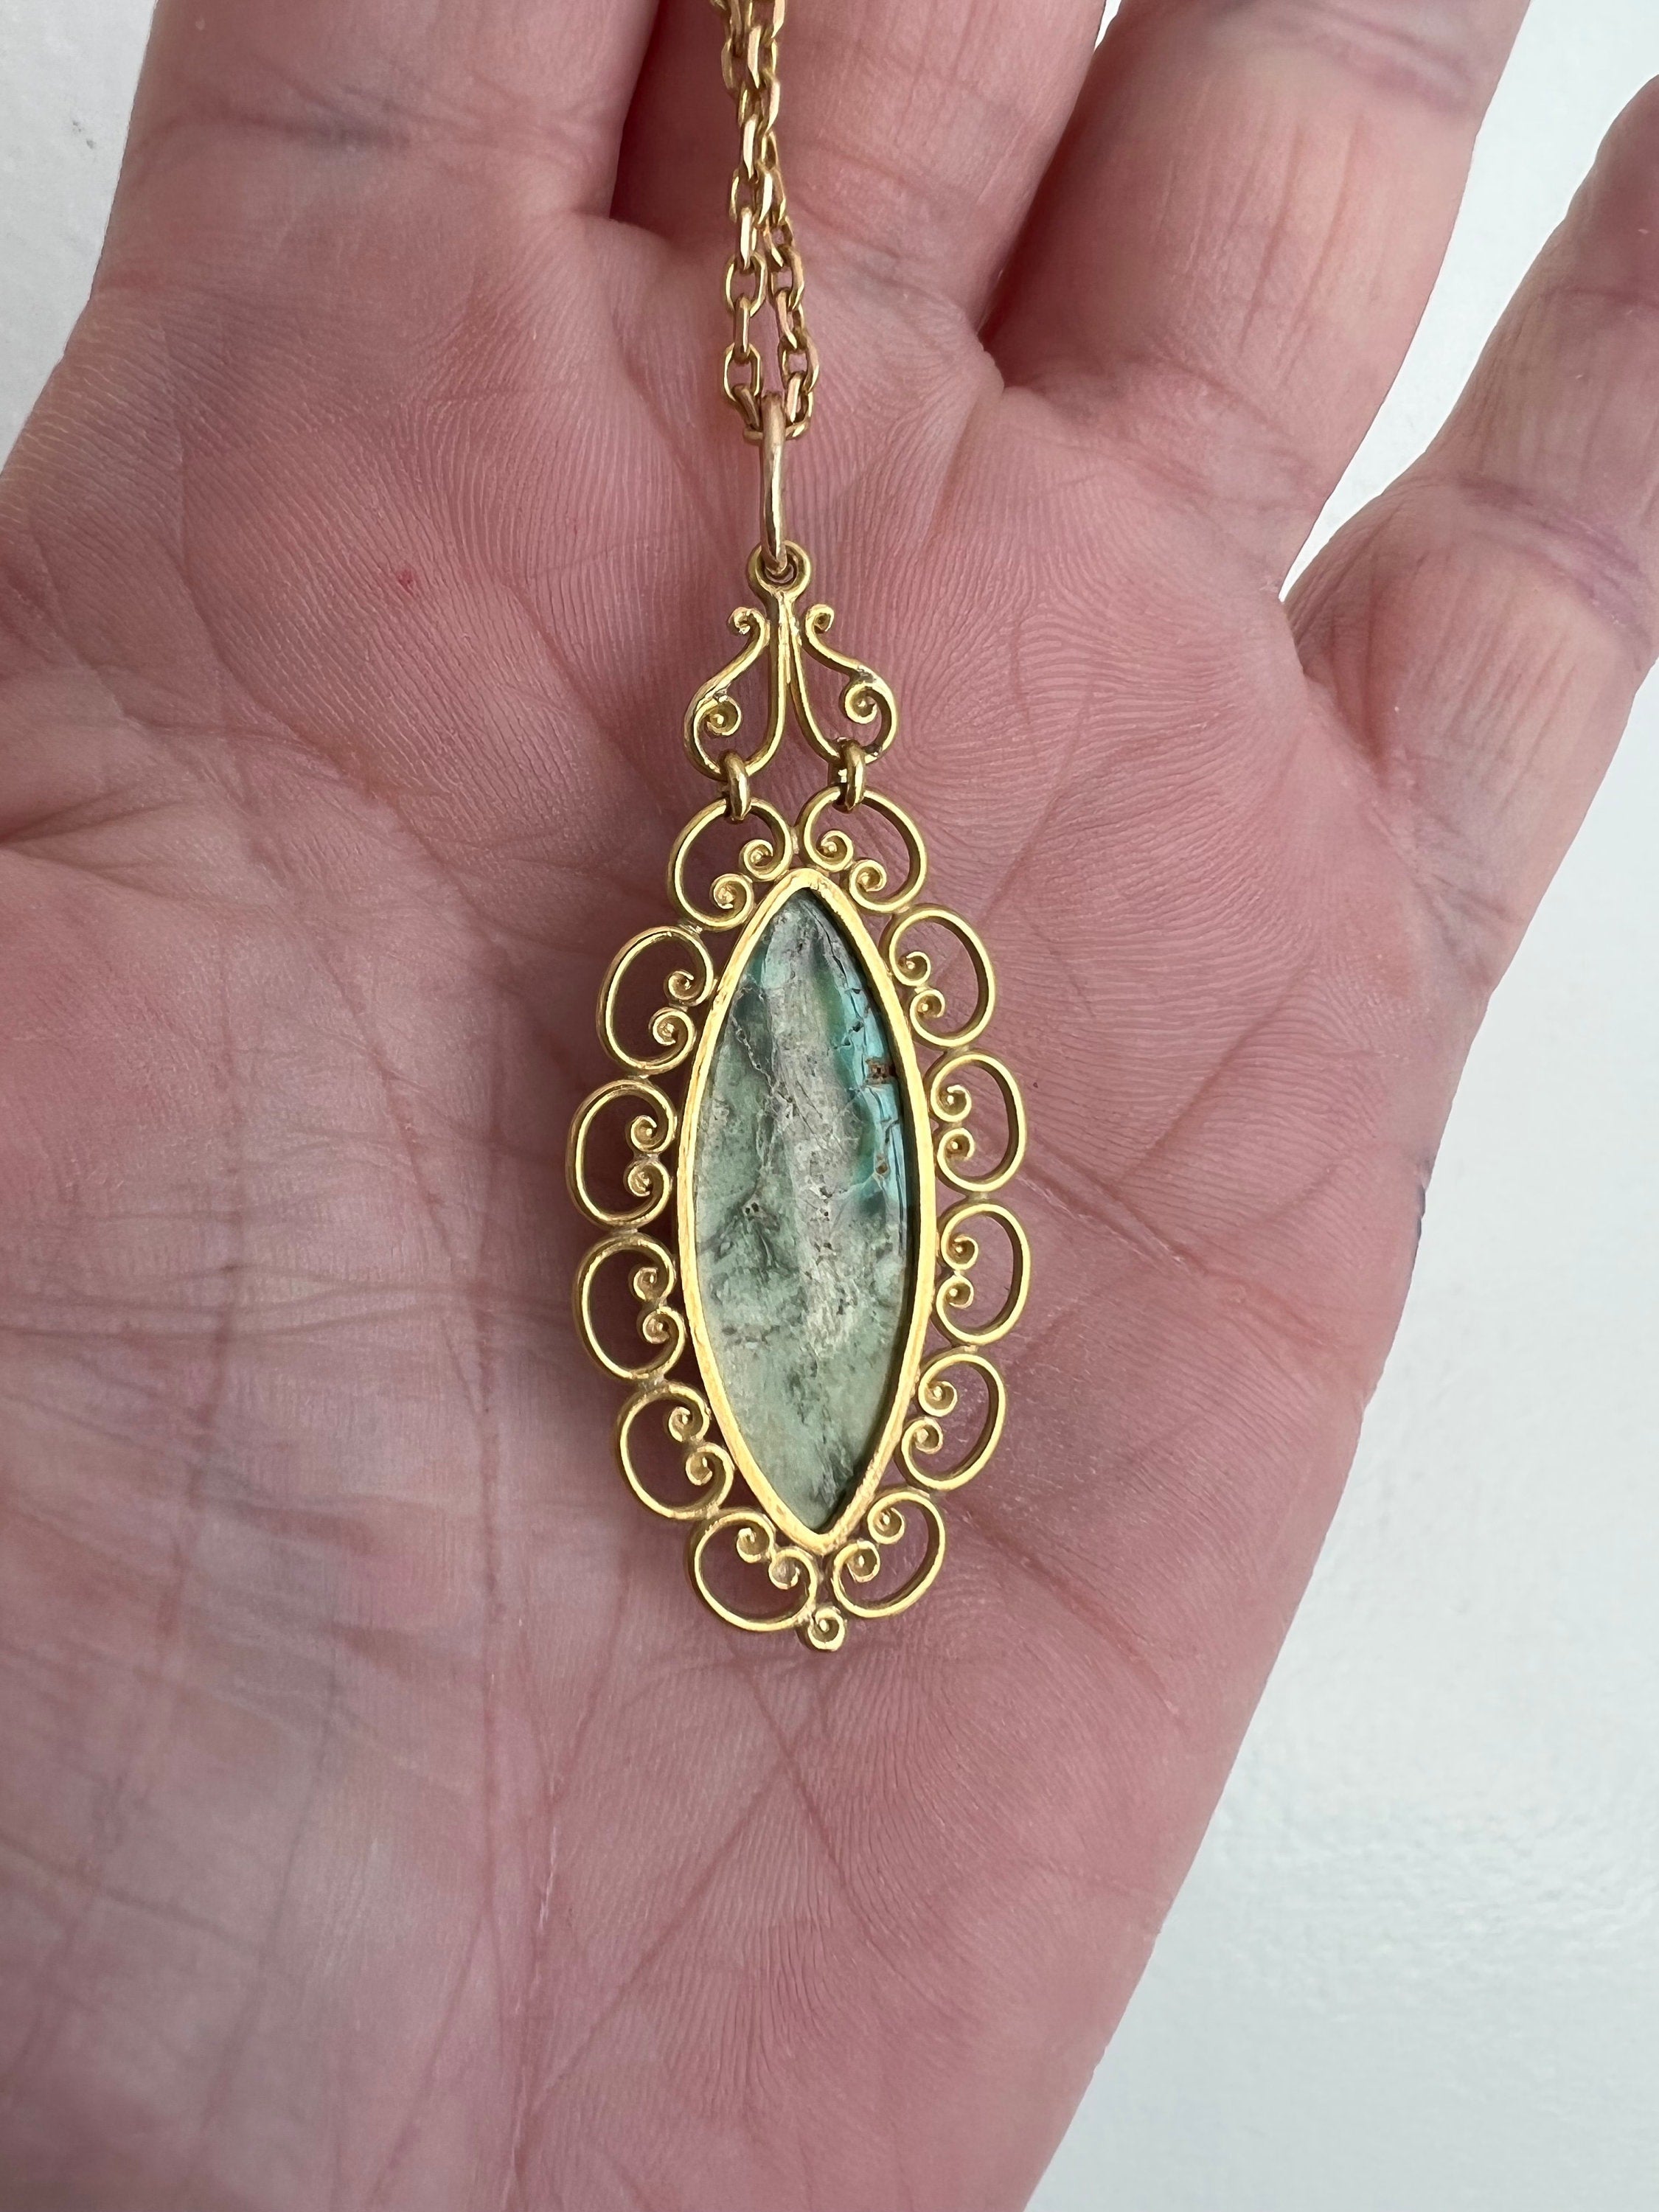 Vintage 18K Yellow Gold Turquoise Pendant and Long Chain.